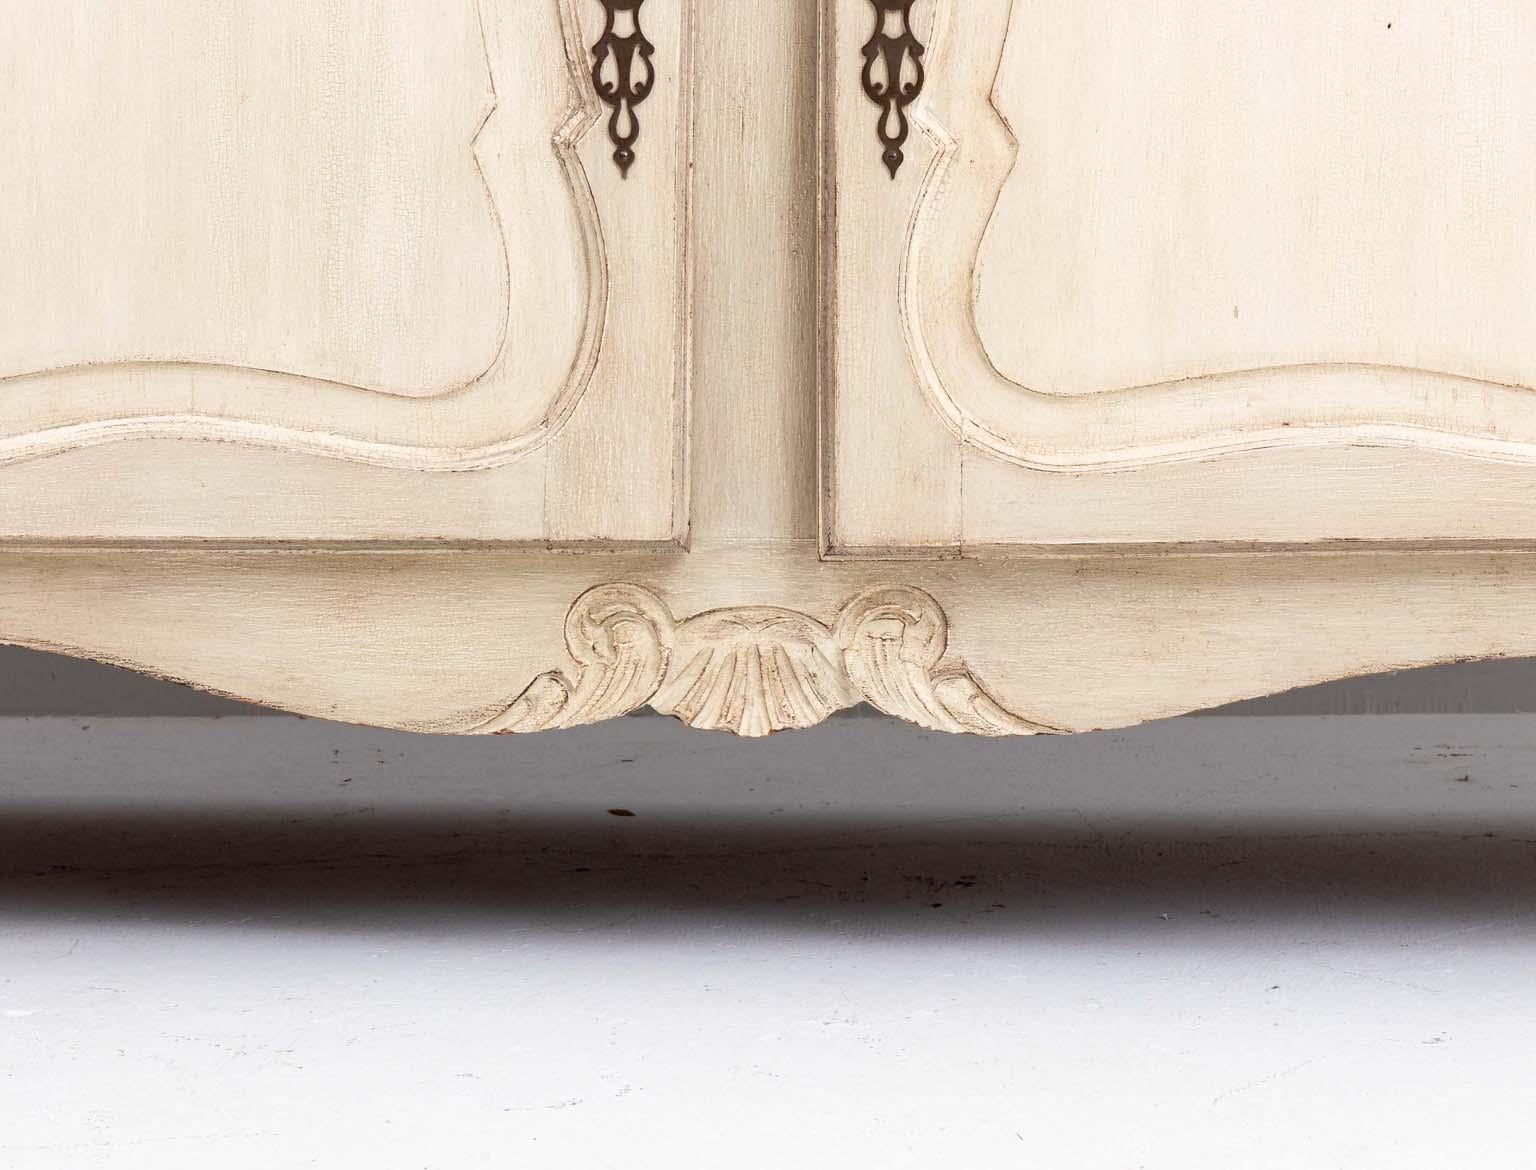 french provincial sideboards